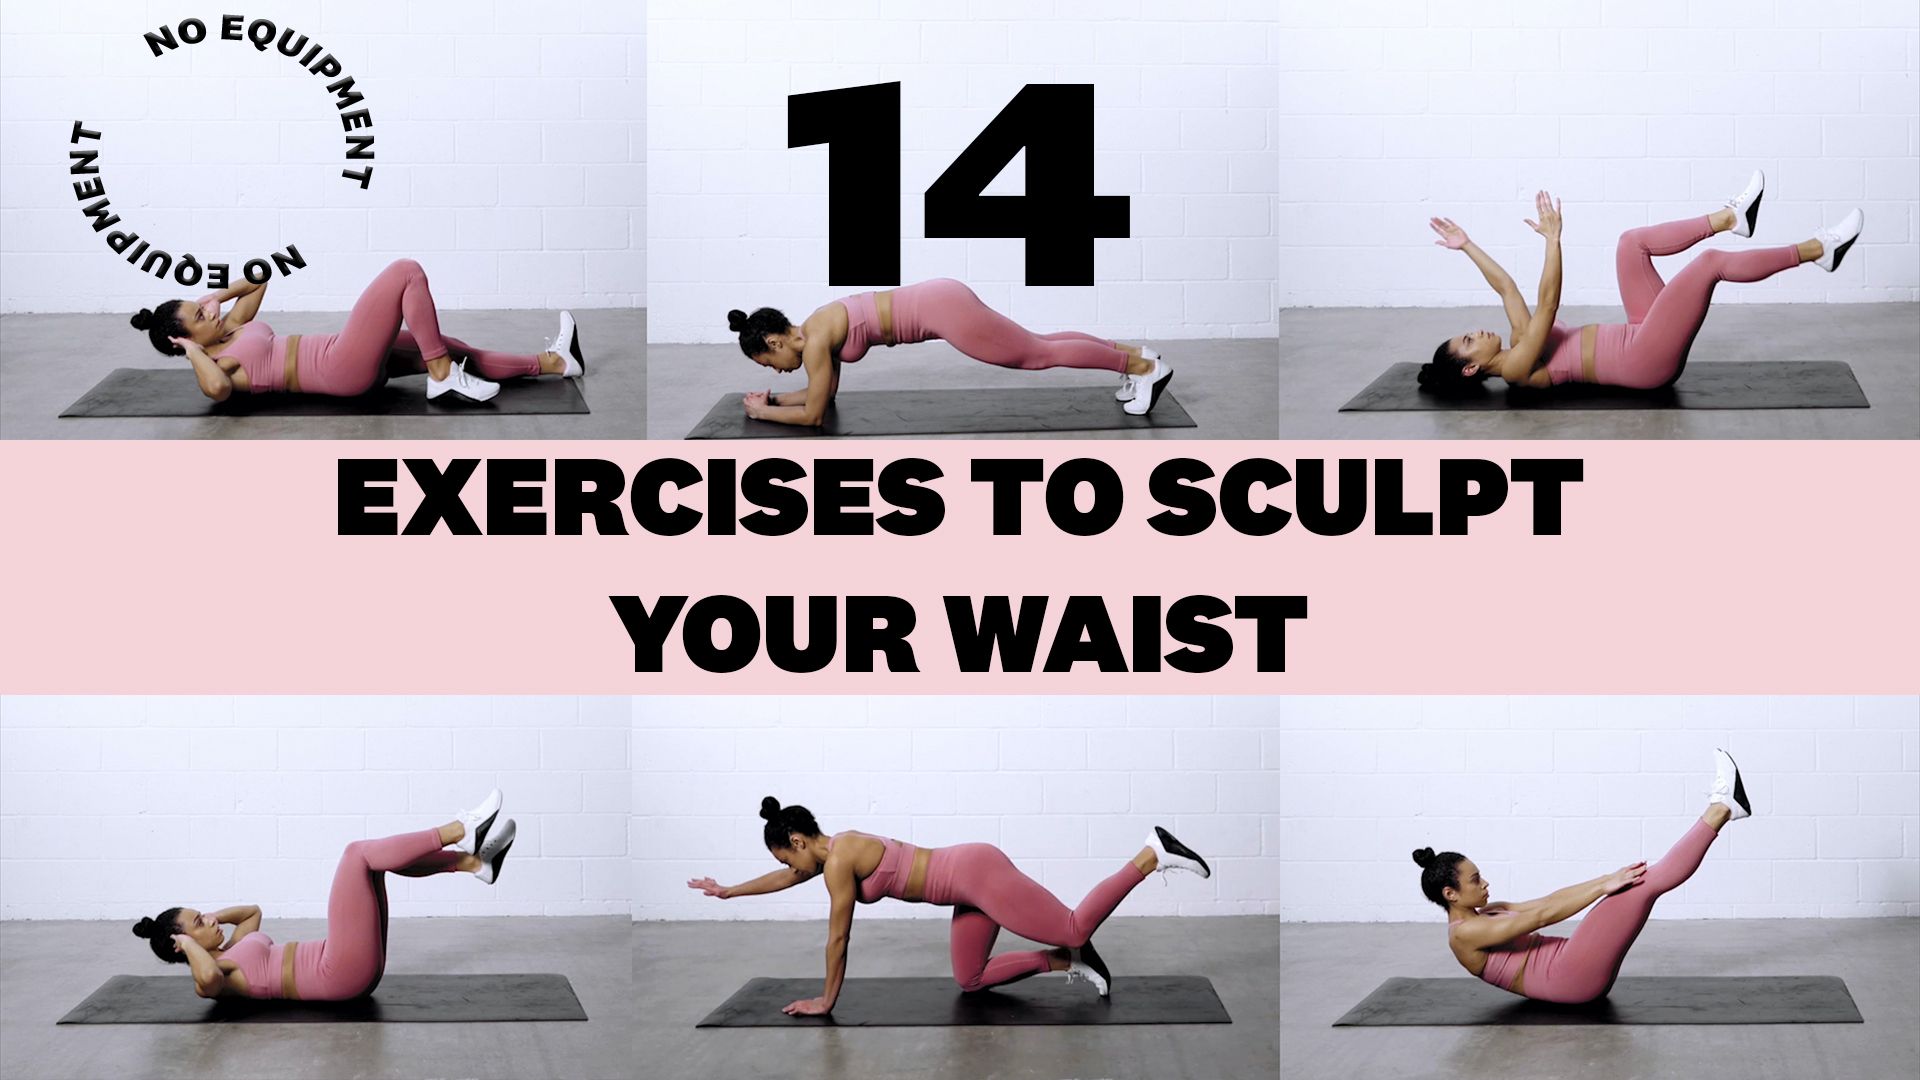 Trim Your Waist and Sculpt Your Ideal Physique – Cardio & Abs